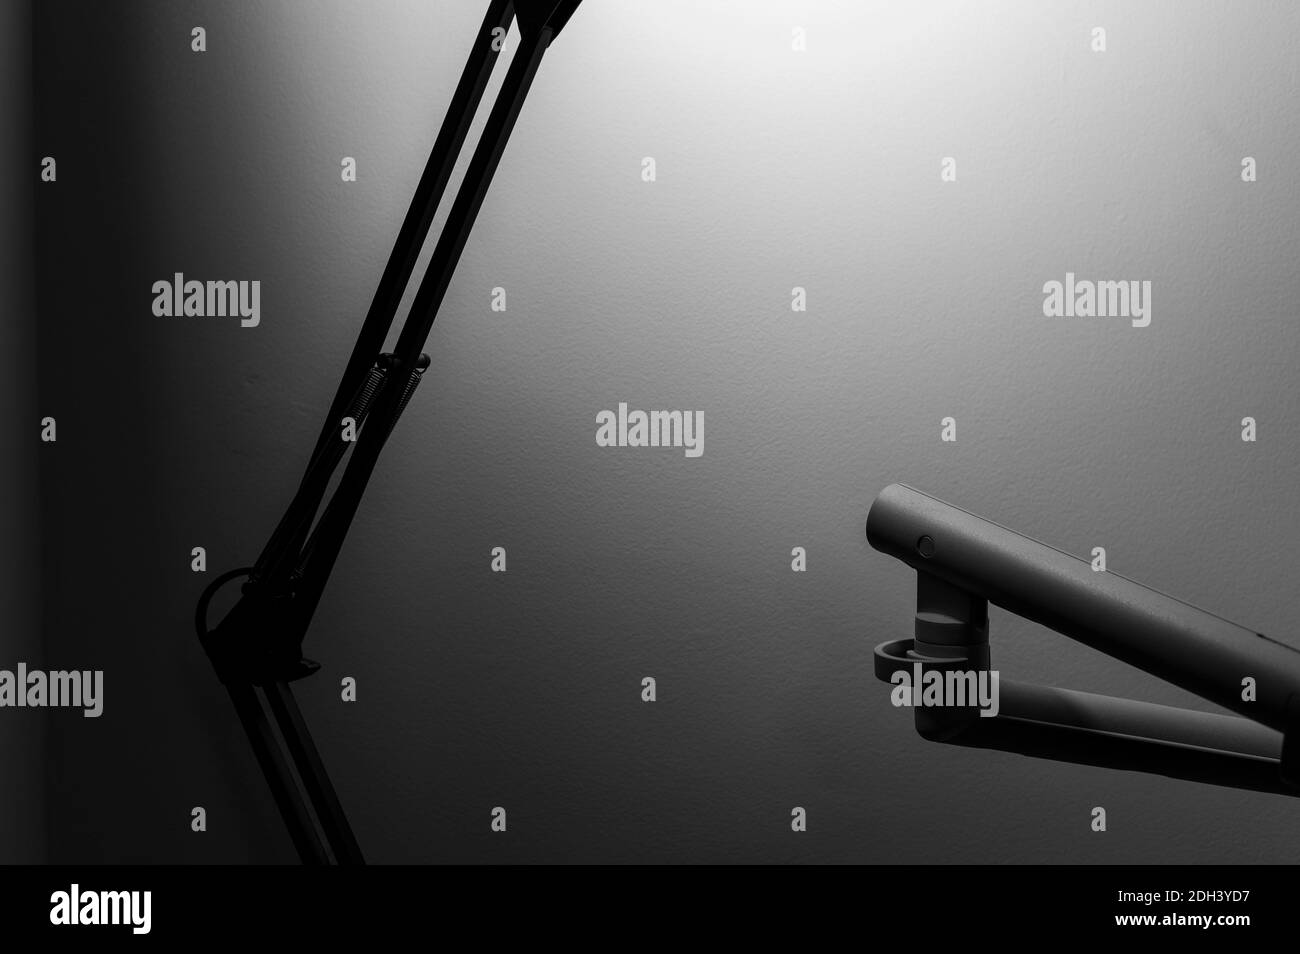 Black and white monochrome image of articulated desk lamp with black arms in foreground blur and with light bulb illuminated with its shadow on wall. Stock Photo